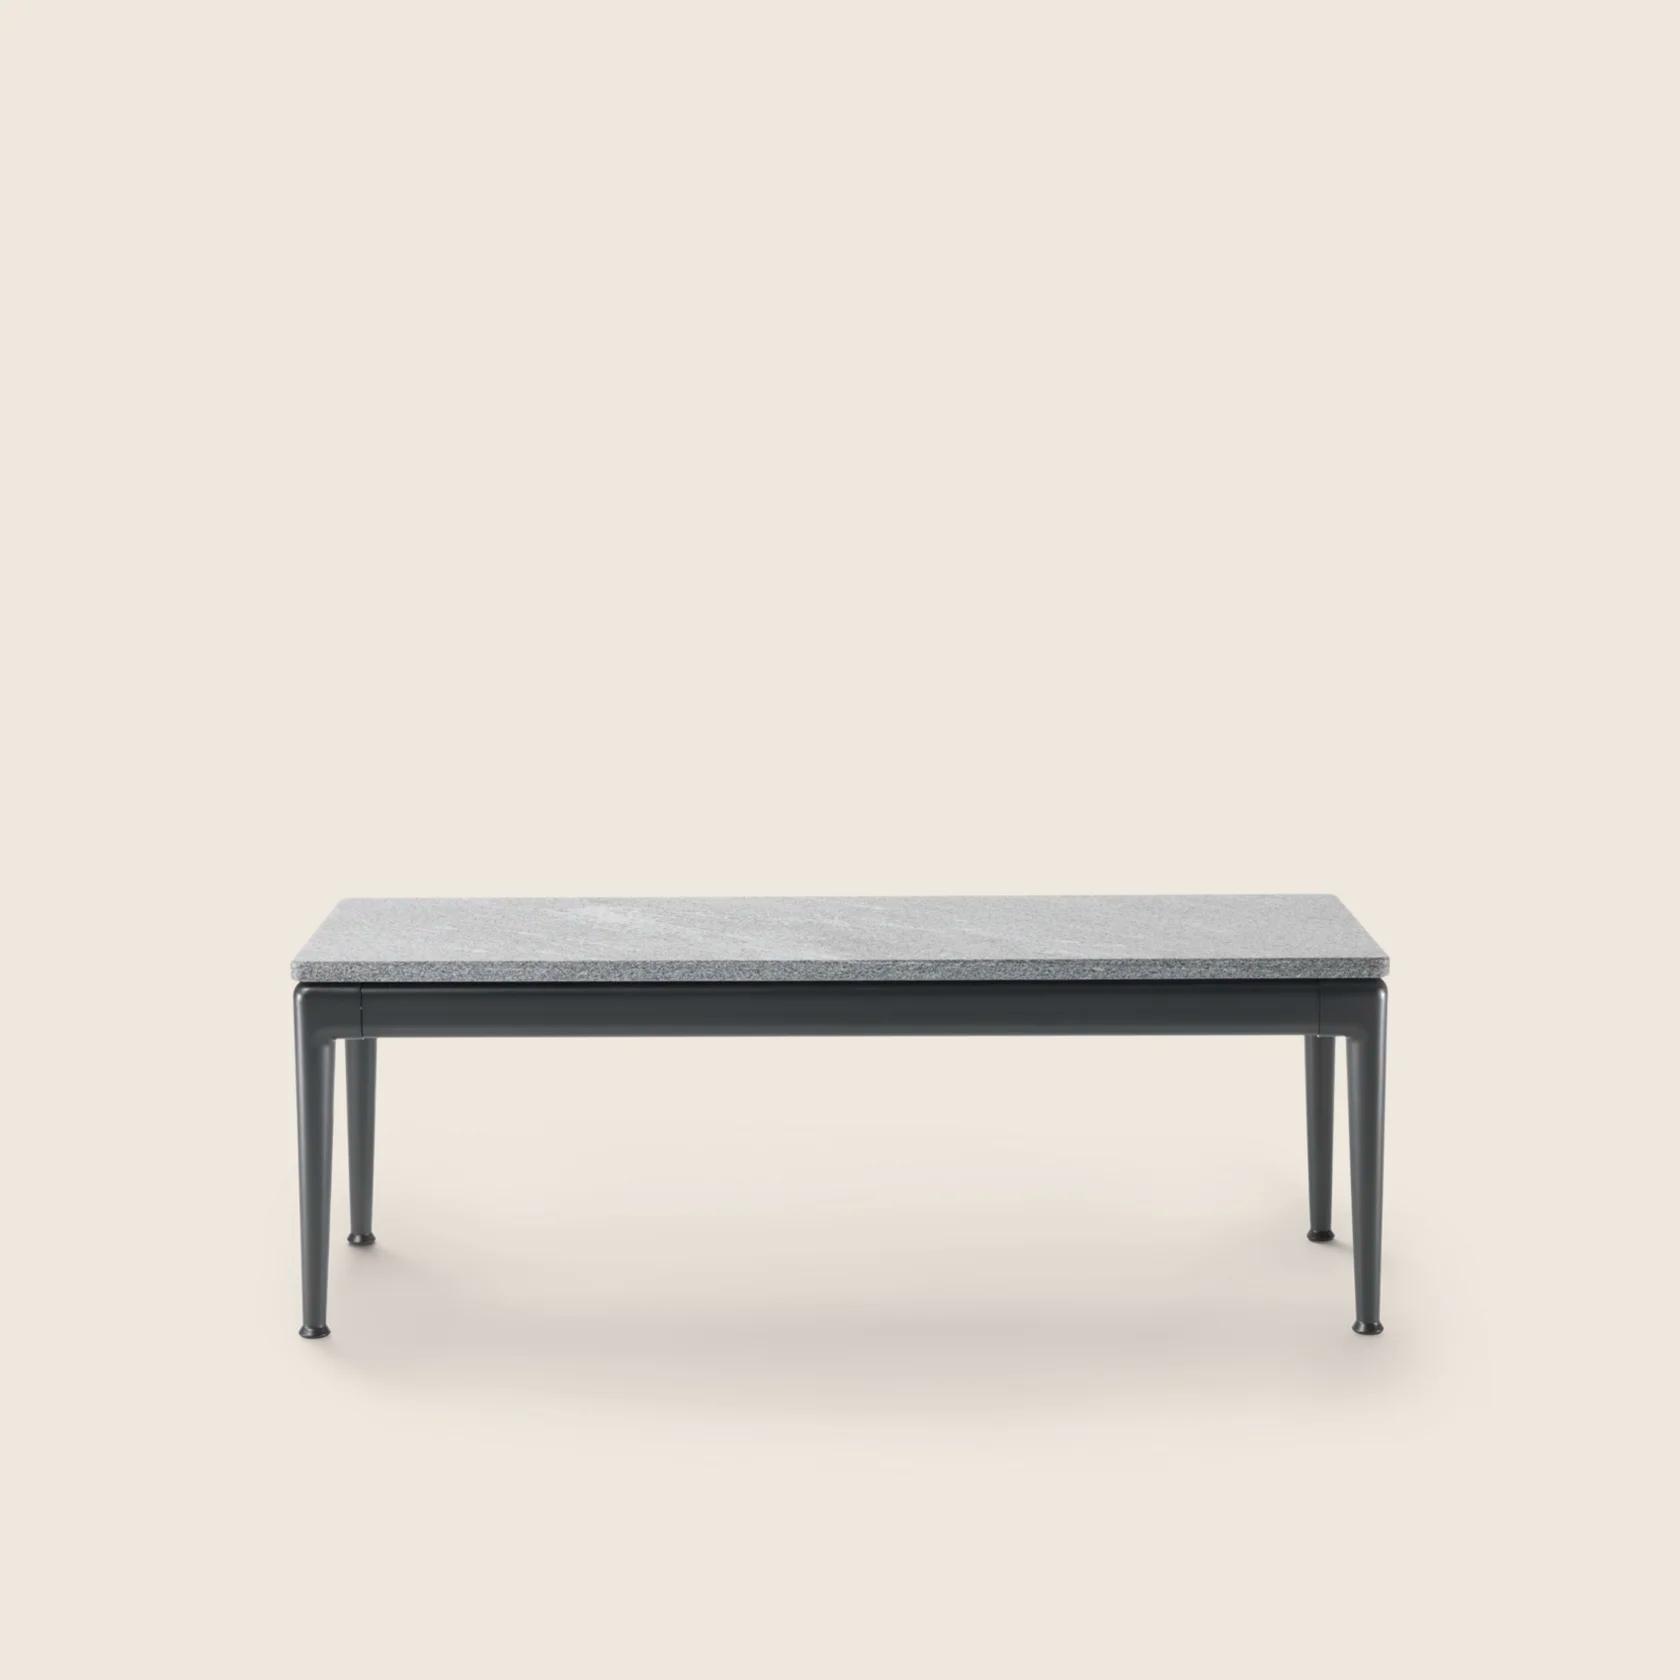 0283H1_PICO OUTDOOR_COFFEETABLE_05.png